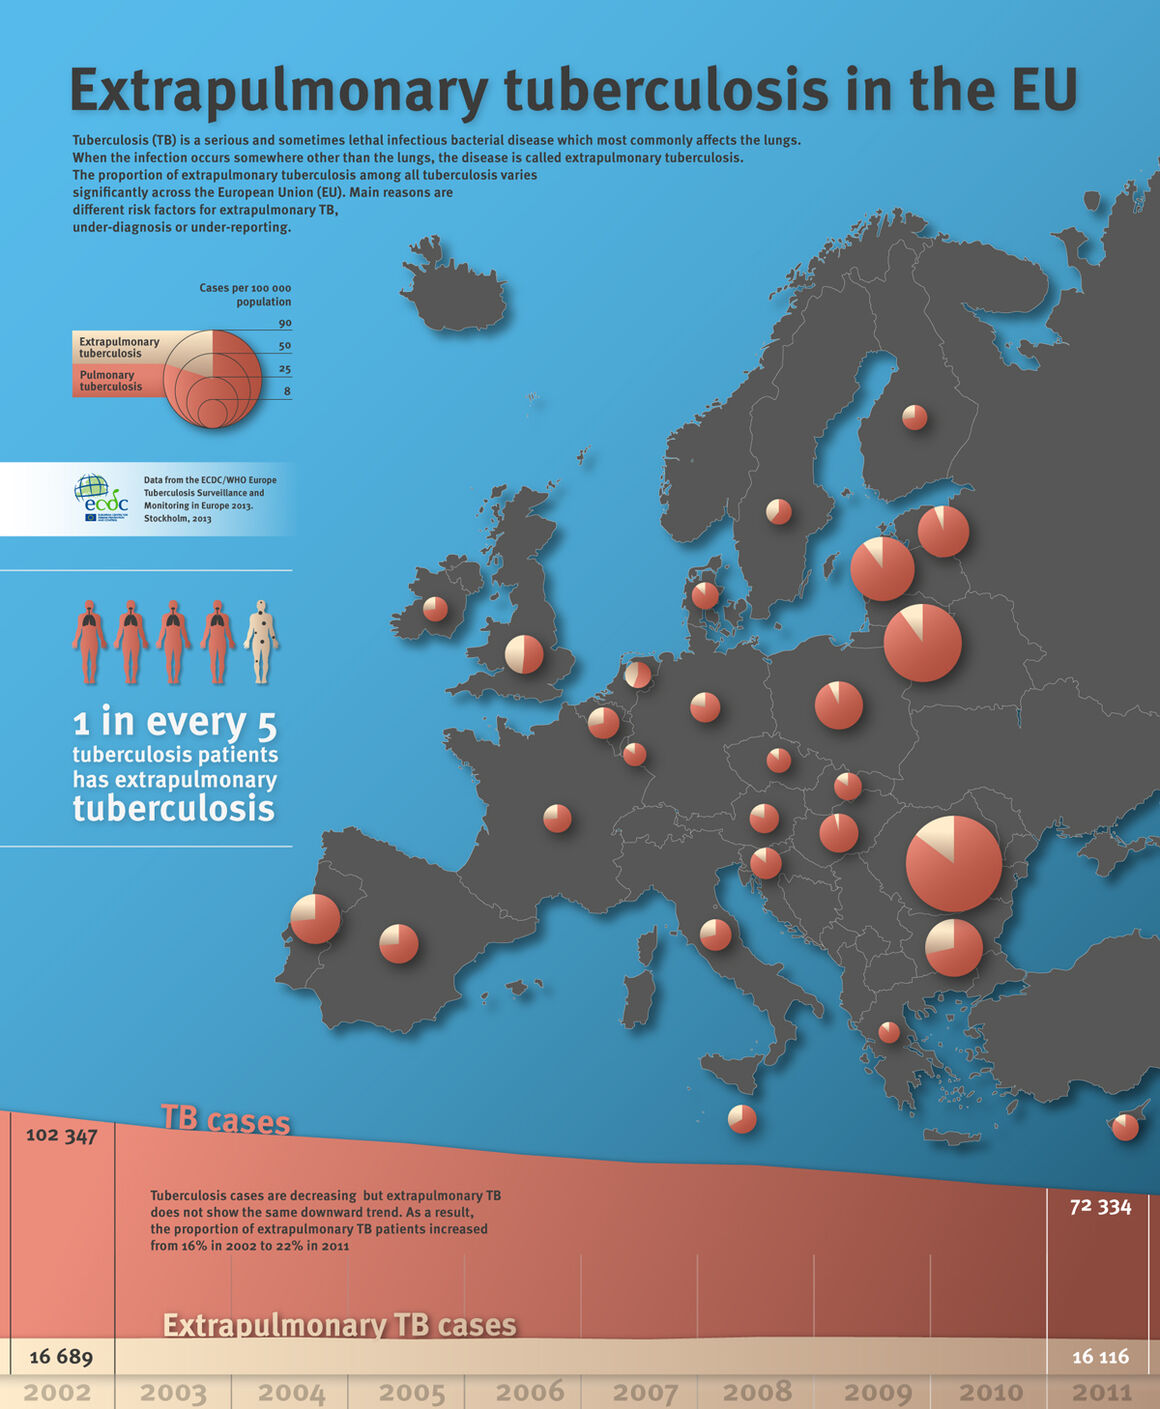 Infographic showing extrapulmonary tuberculosis in the EU countries